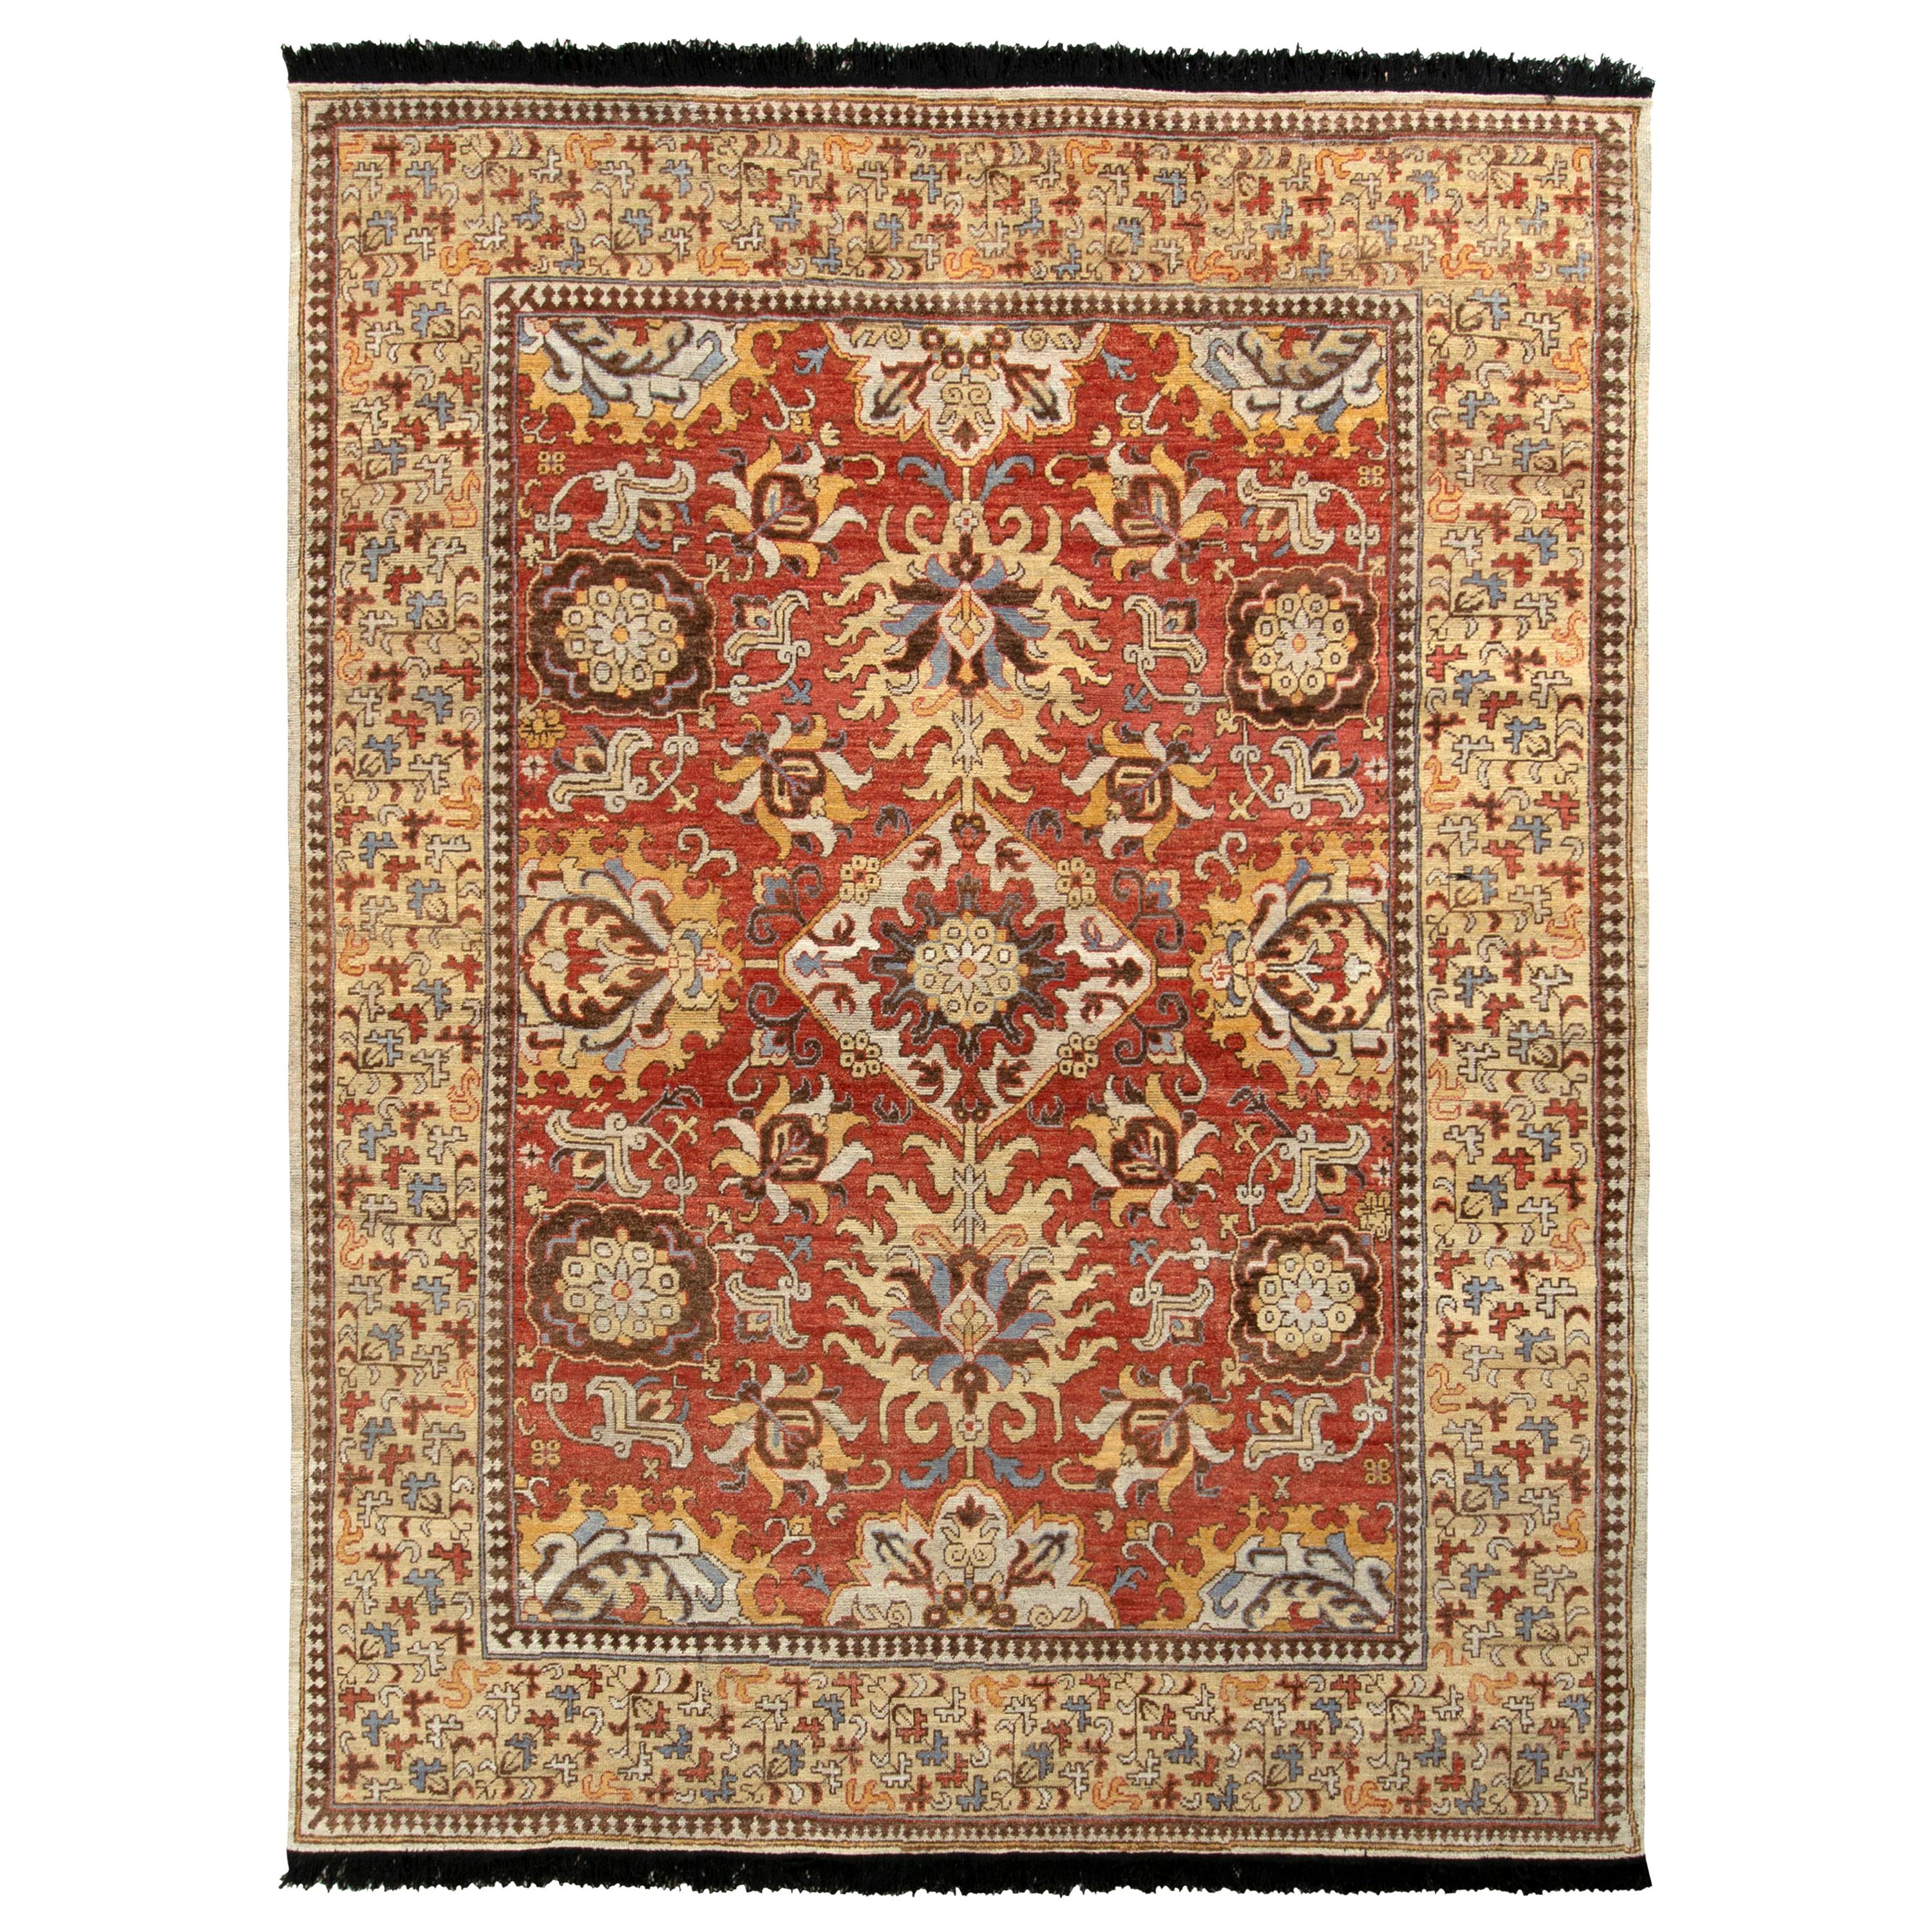 Rug & Kilim’s Kuba Style Rug in Red and Beige-Brown Floral Pattern For Sale